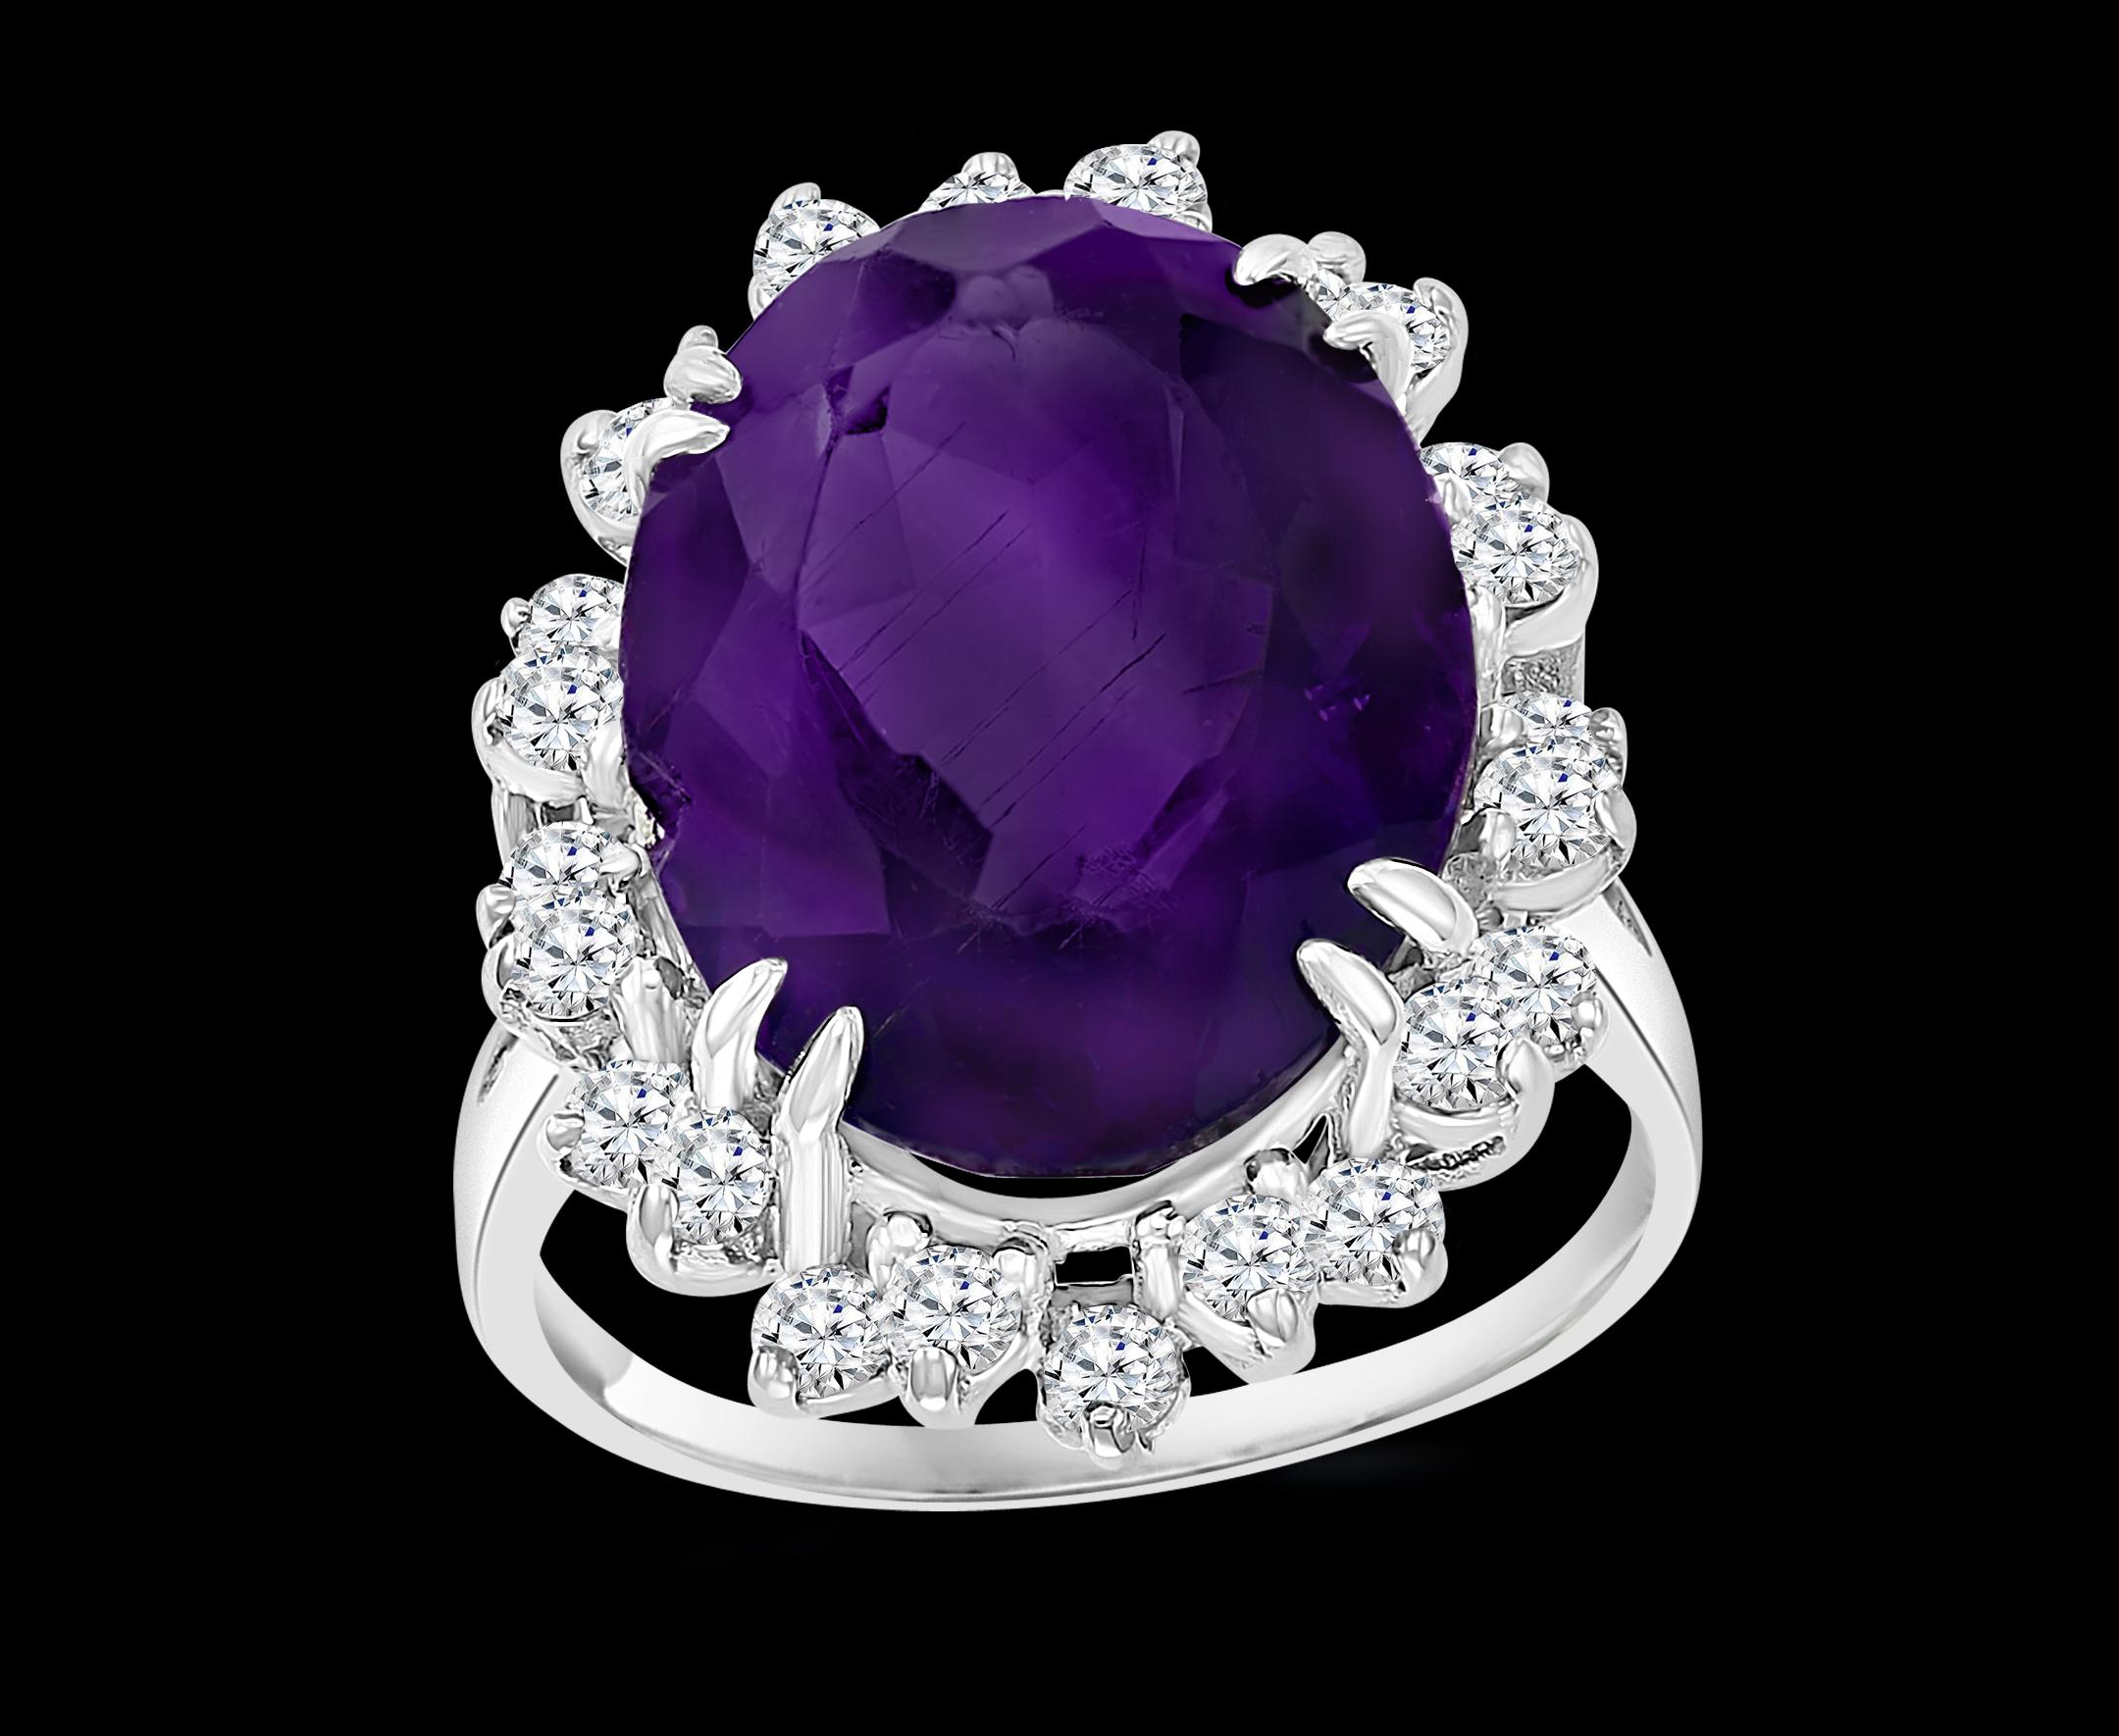 12.5 Carat Amethyst and 1 Ct Diamond Cocktail /Engagement Ring in 14 karat White gold,Estate from 1970's

This is a ring which has a 12.5 carat of high quality Amethyst . Color and clarity is very nice.
24 round brilliant cut diamonds weighing 1 ct